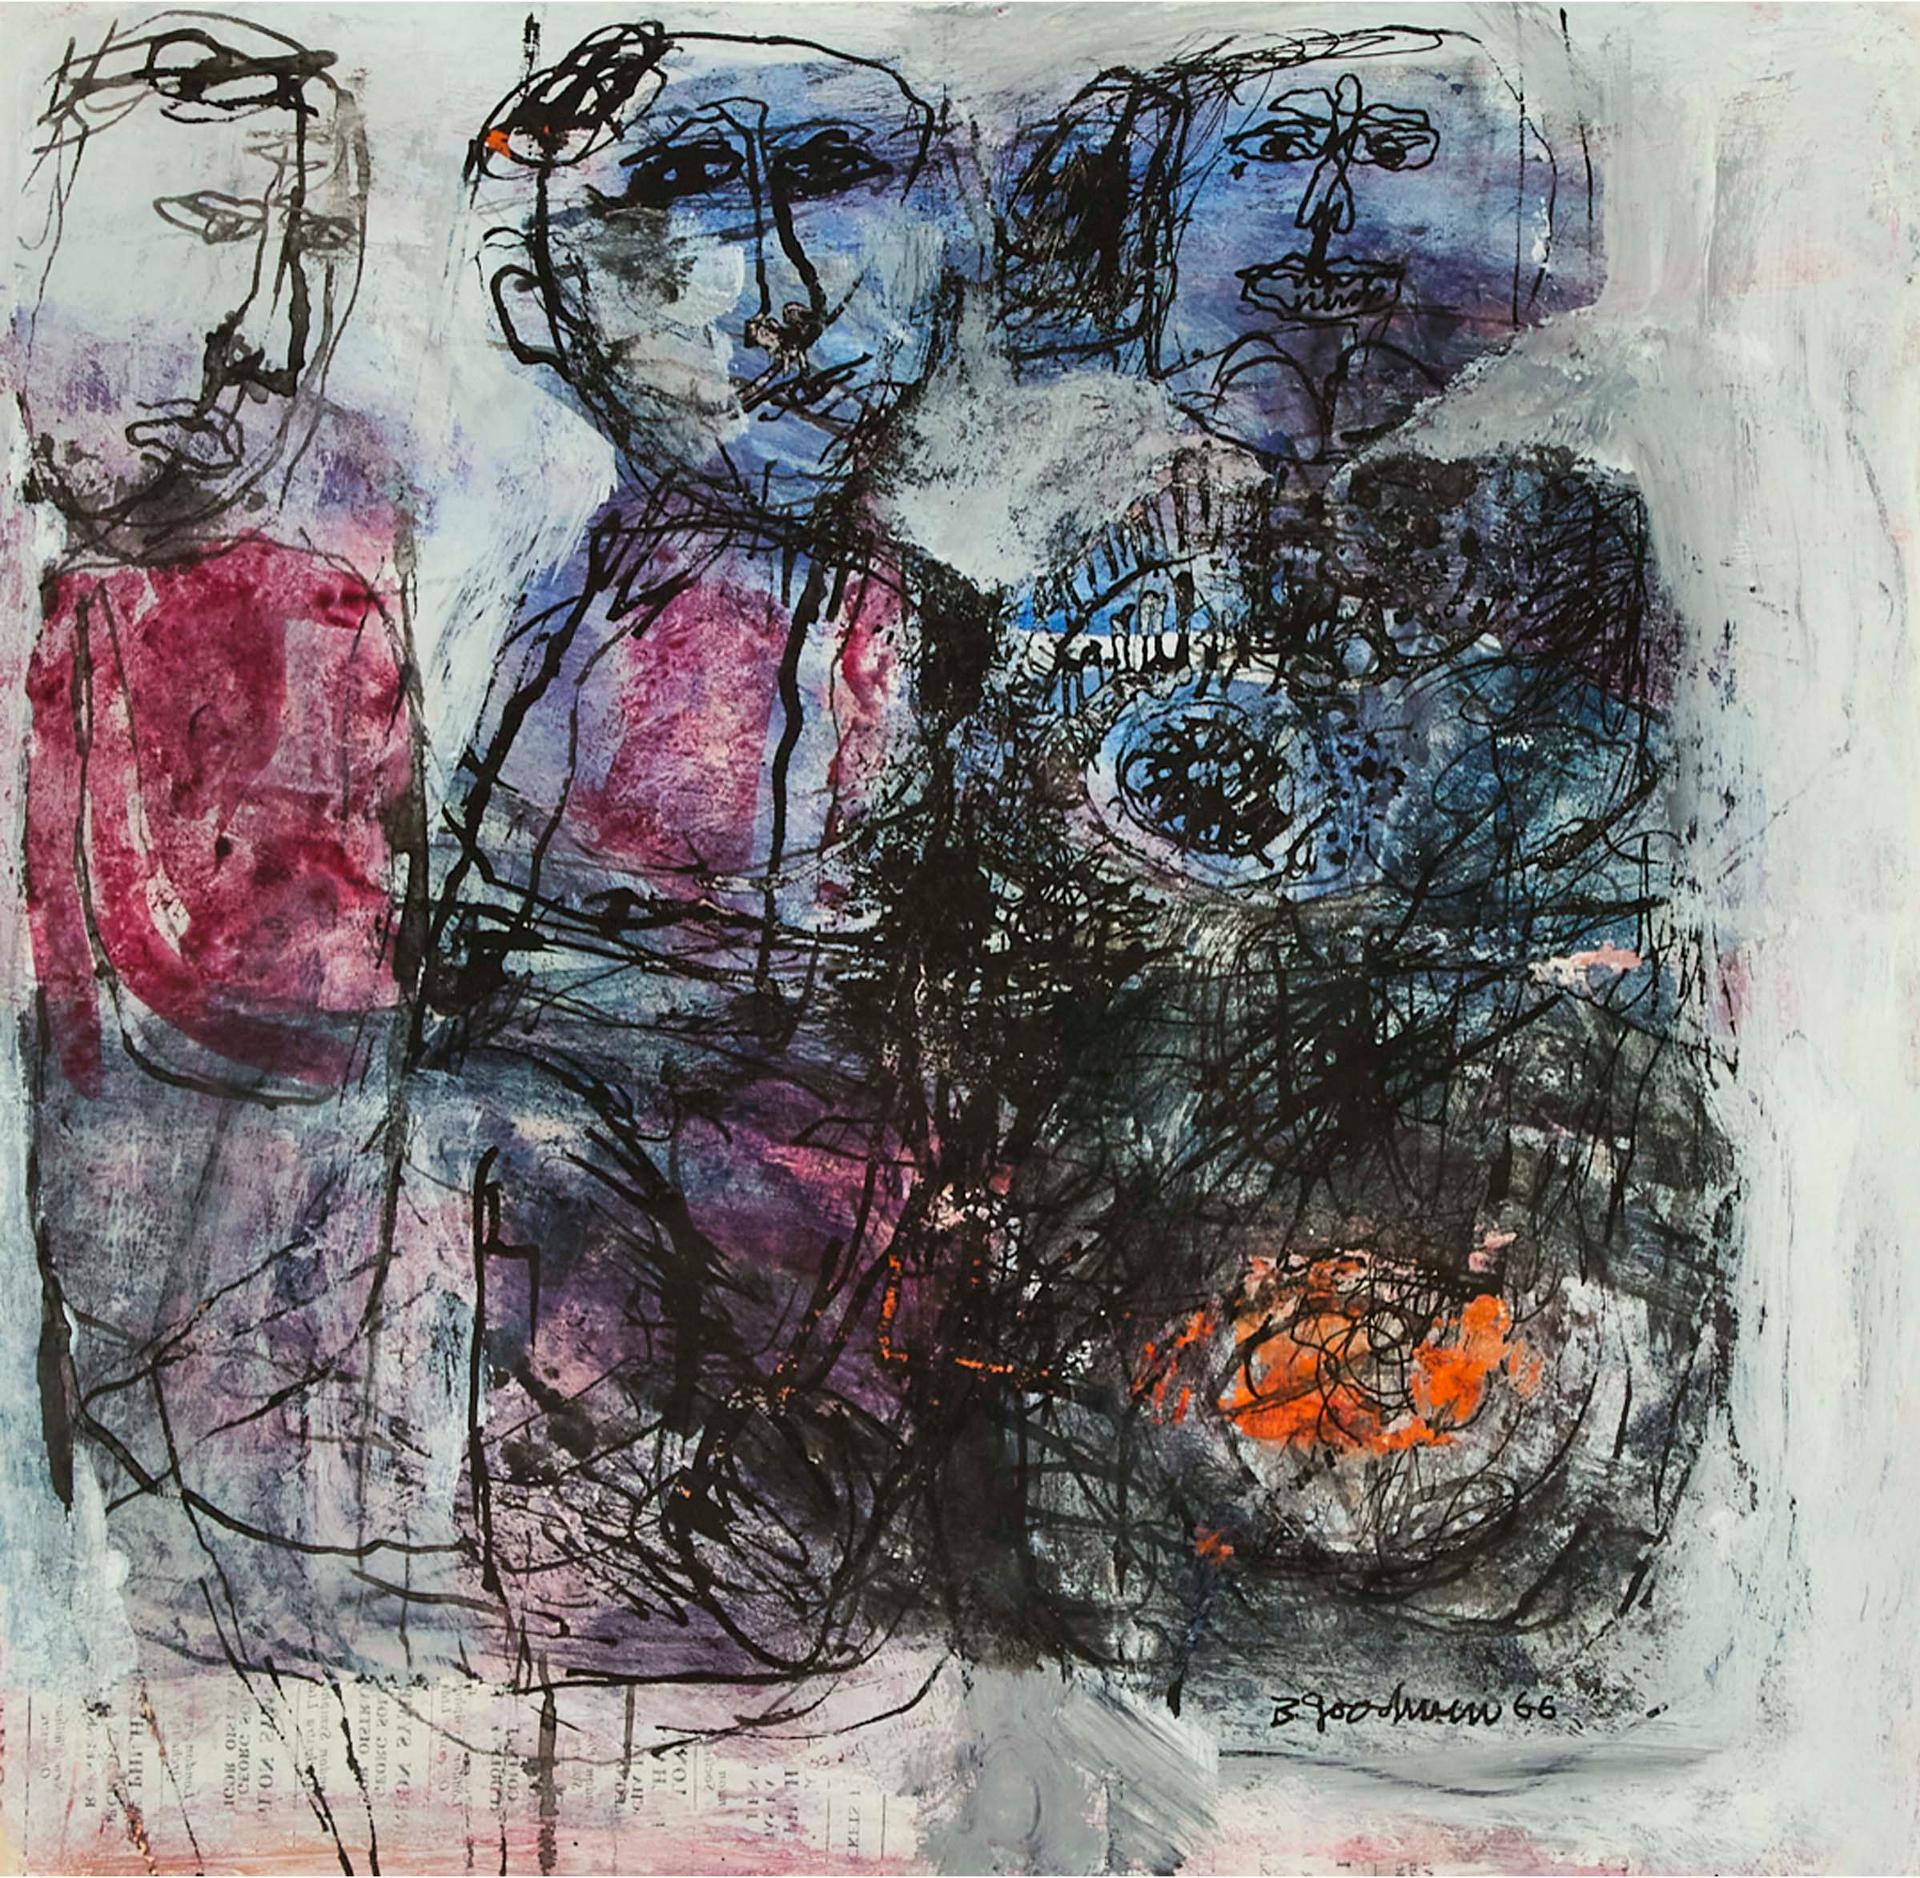 Betty Roodish Goodwin (1923-2008) - Abstract Figures, 1966